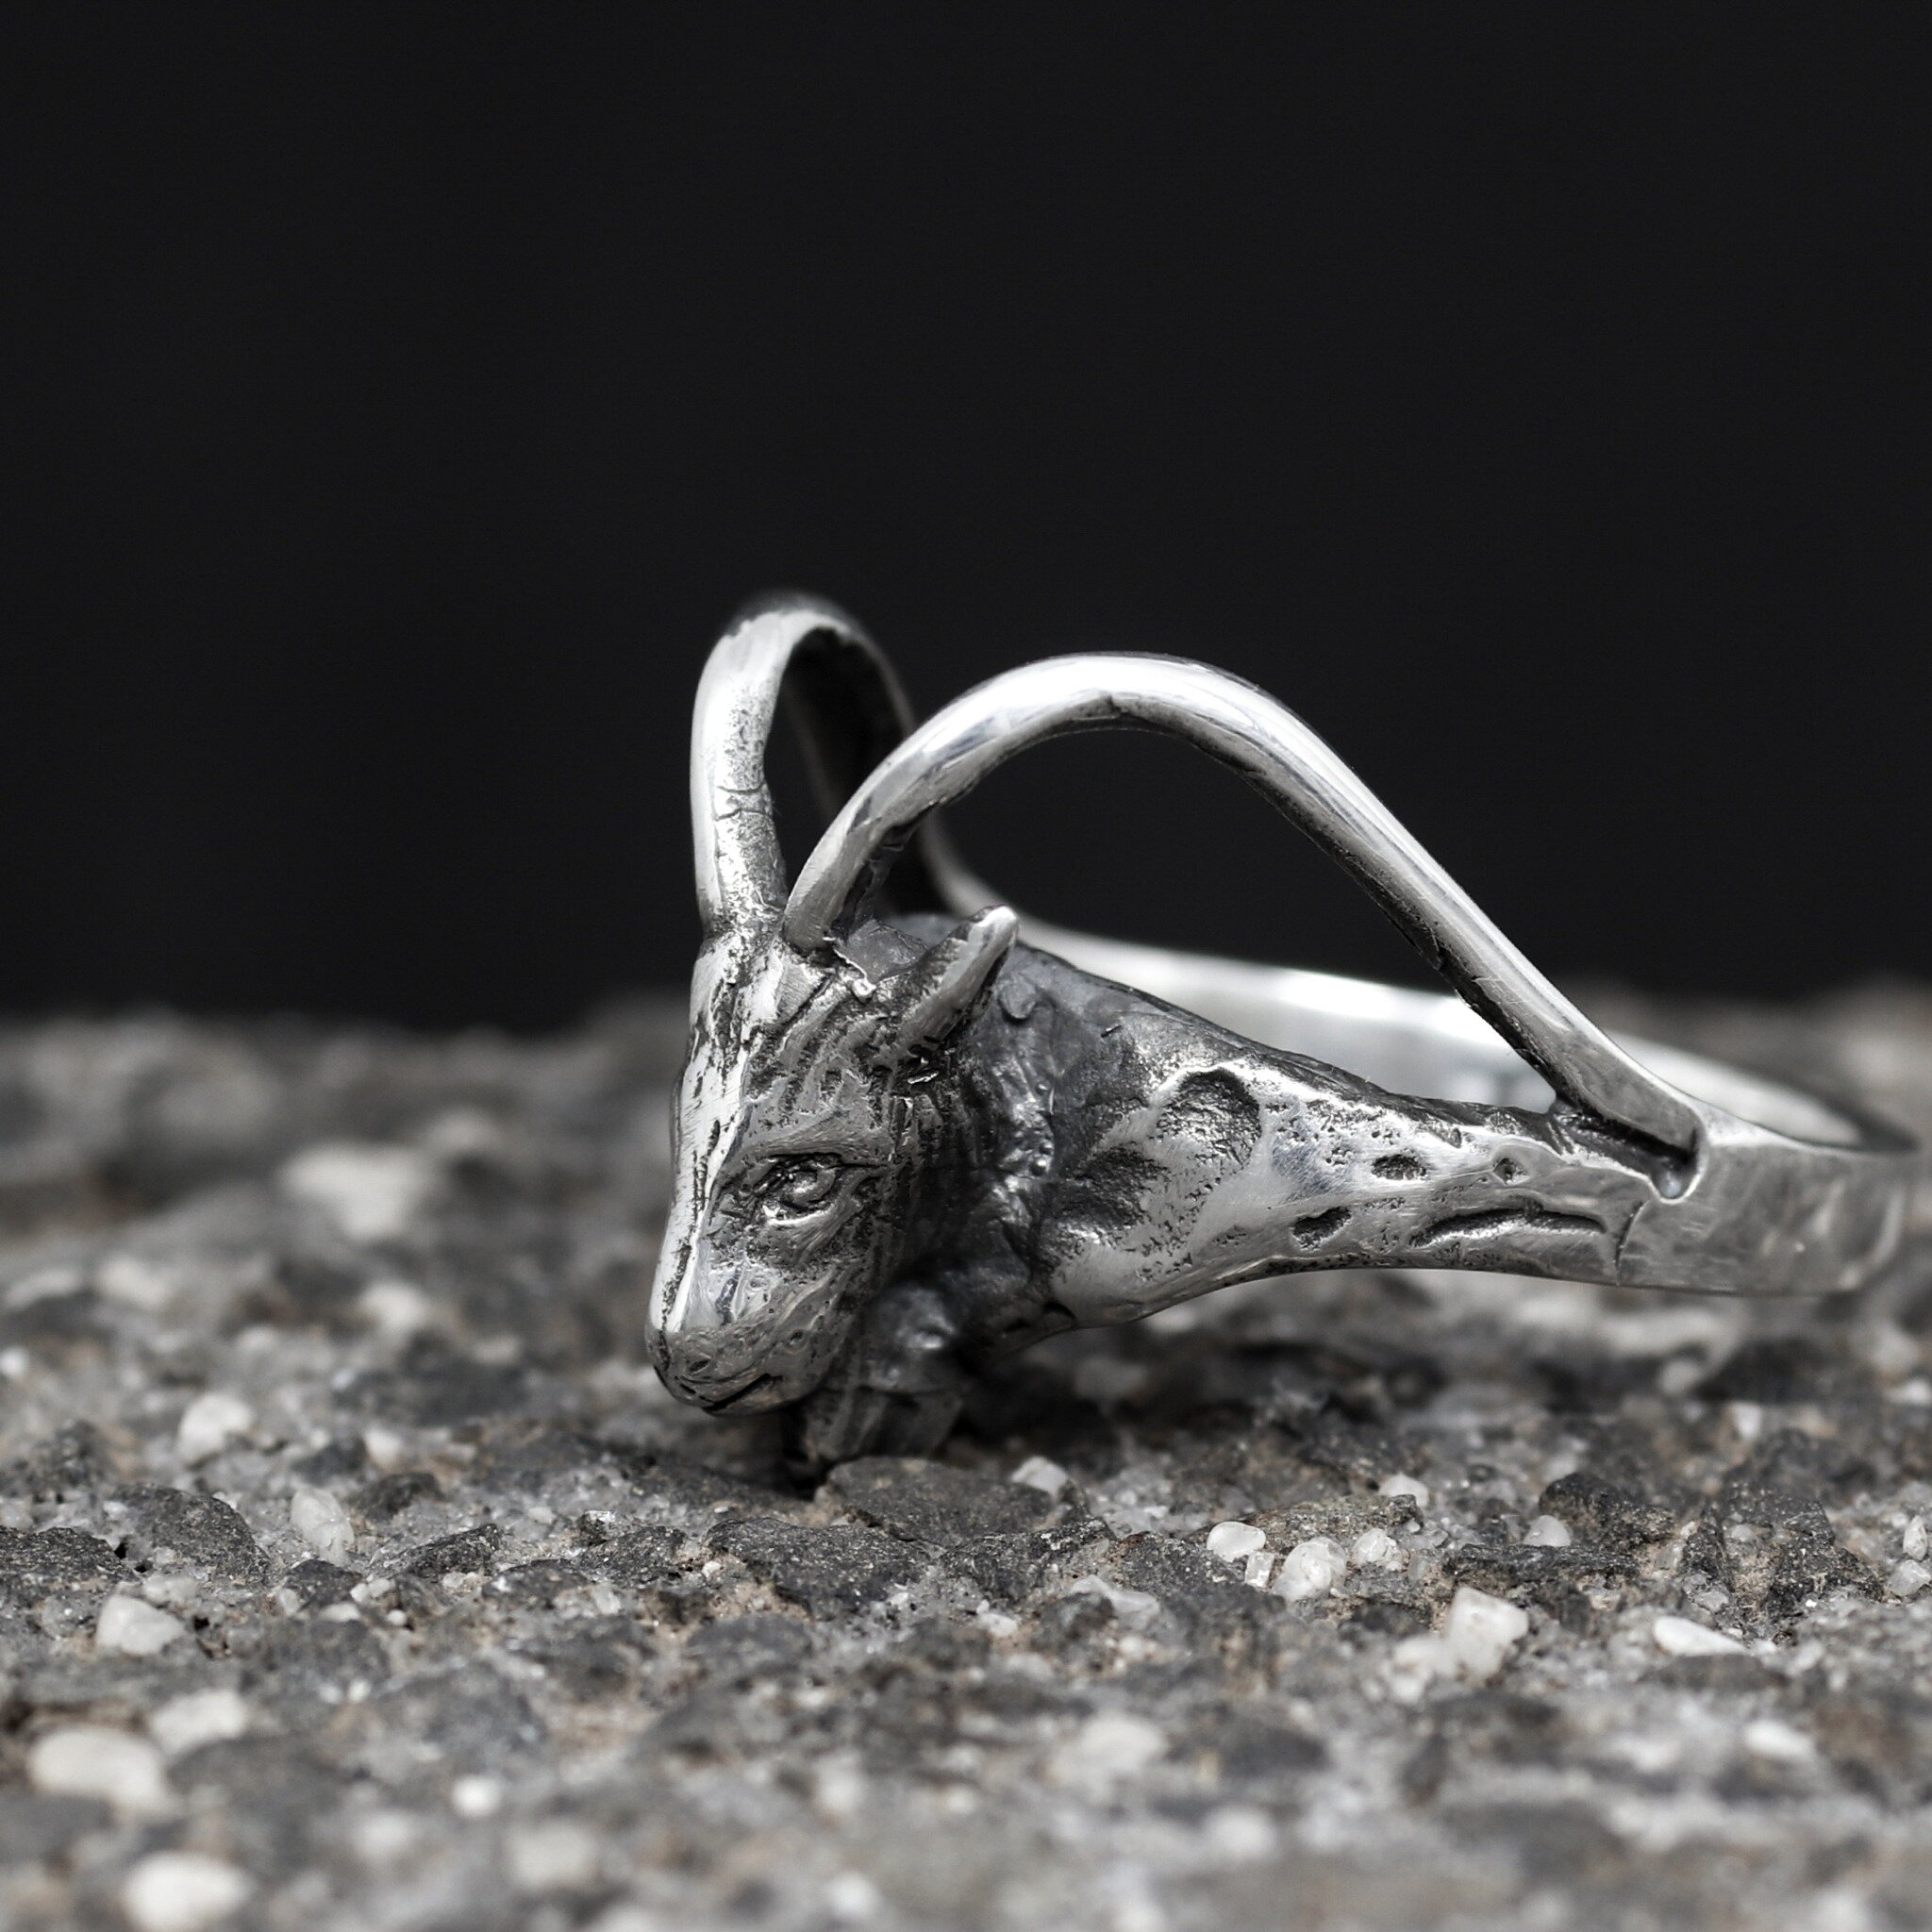 Ram longhorn ring in solid silver. Or is it a goat? 🤔 Longhorn buck, instead? 

#sheeporgoat #animalring #animaljewellery #animaljewelry #ram #goat #horns #alastairscollection